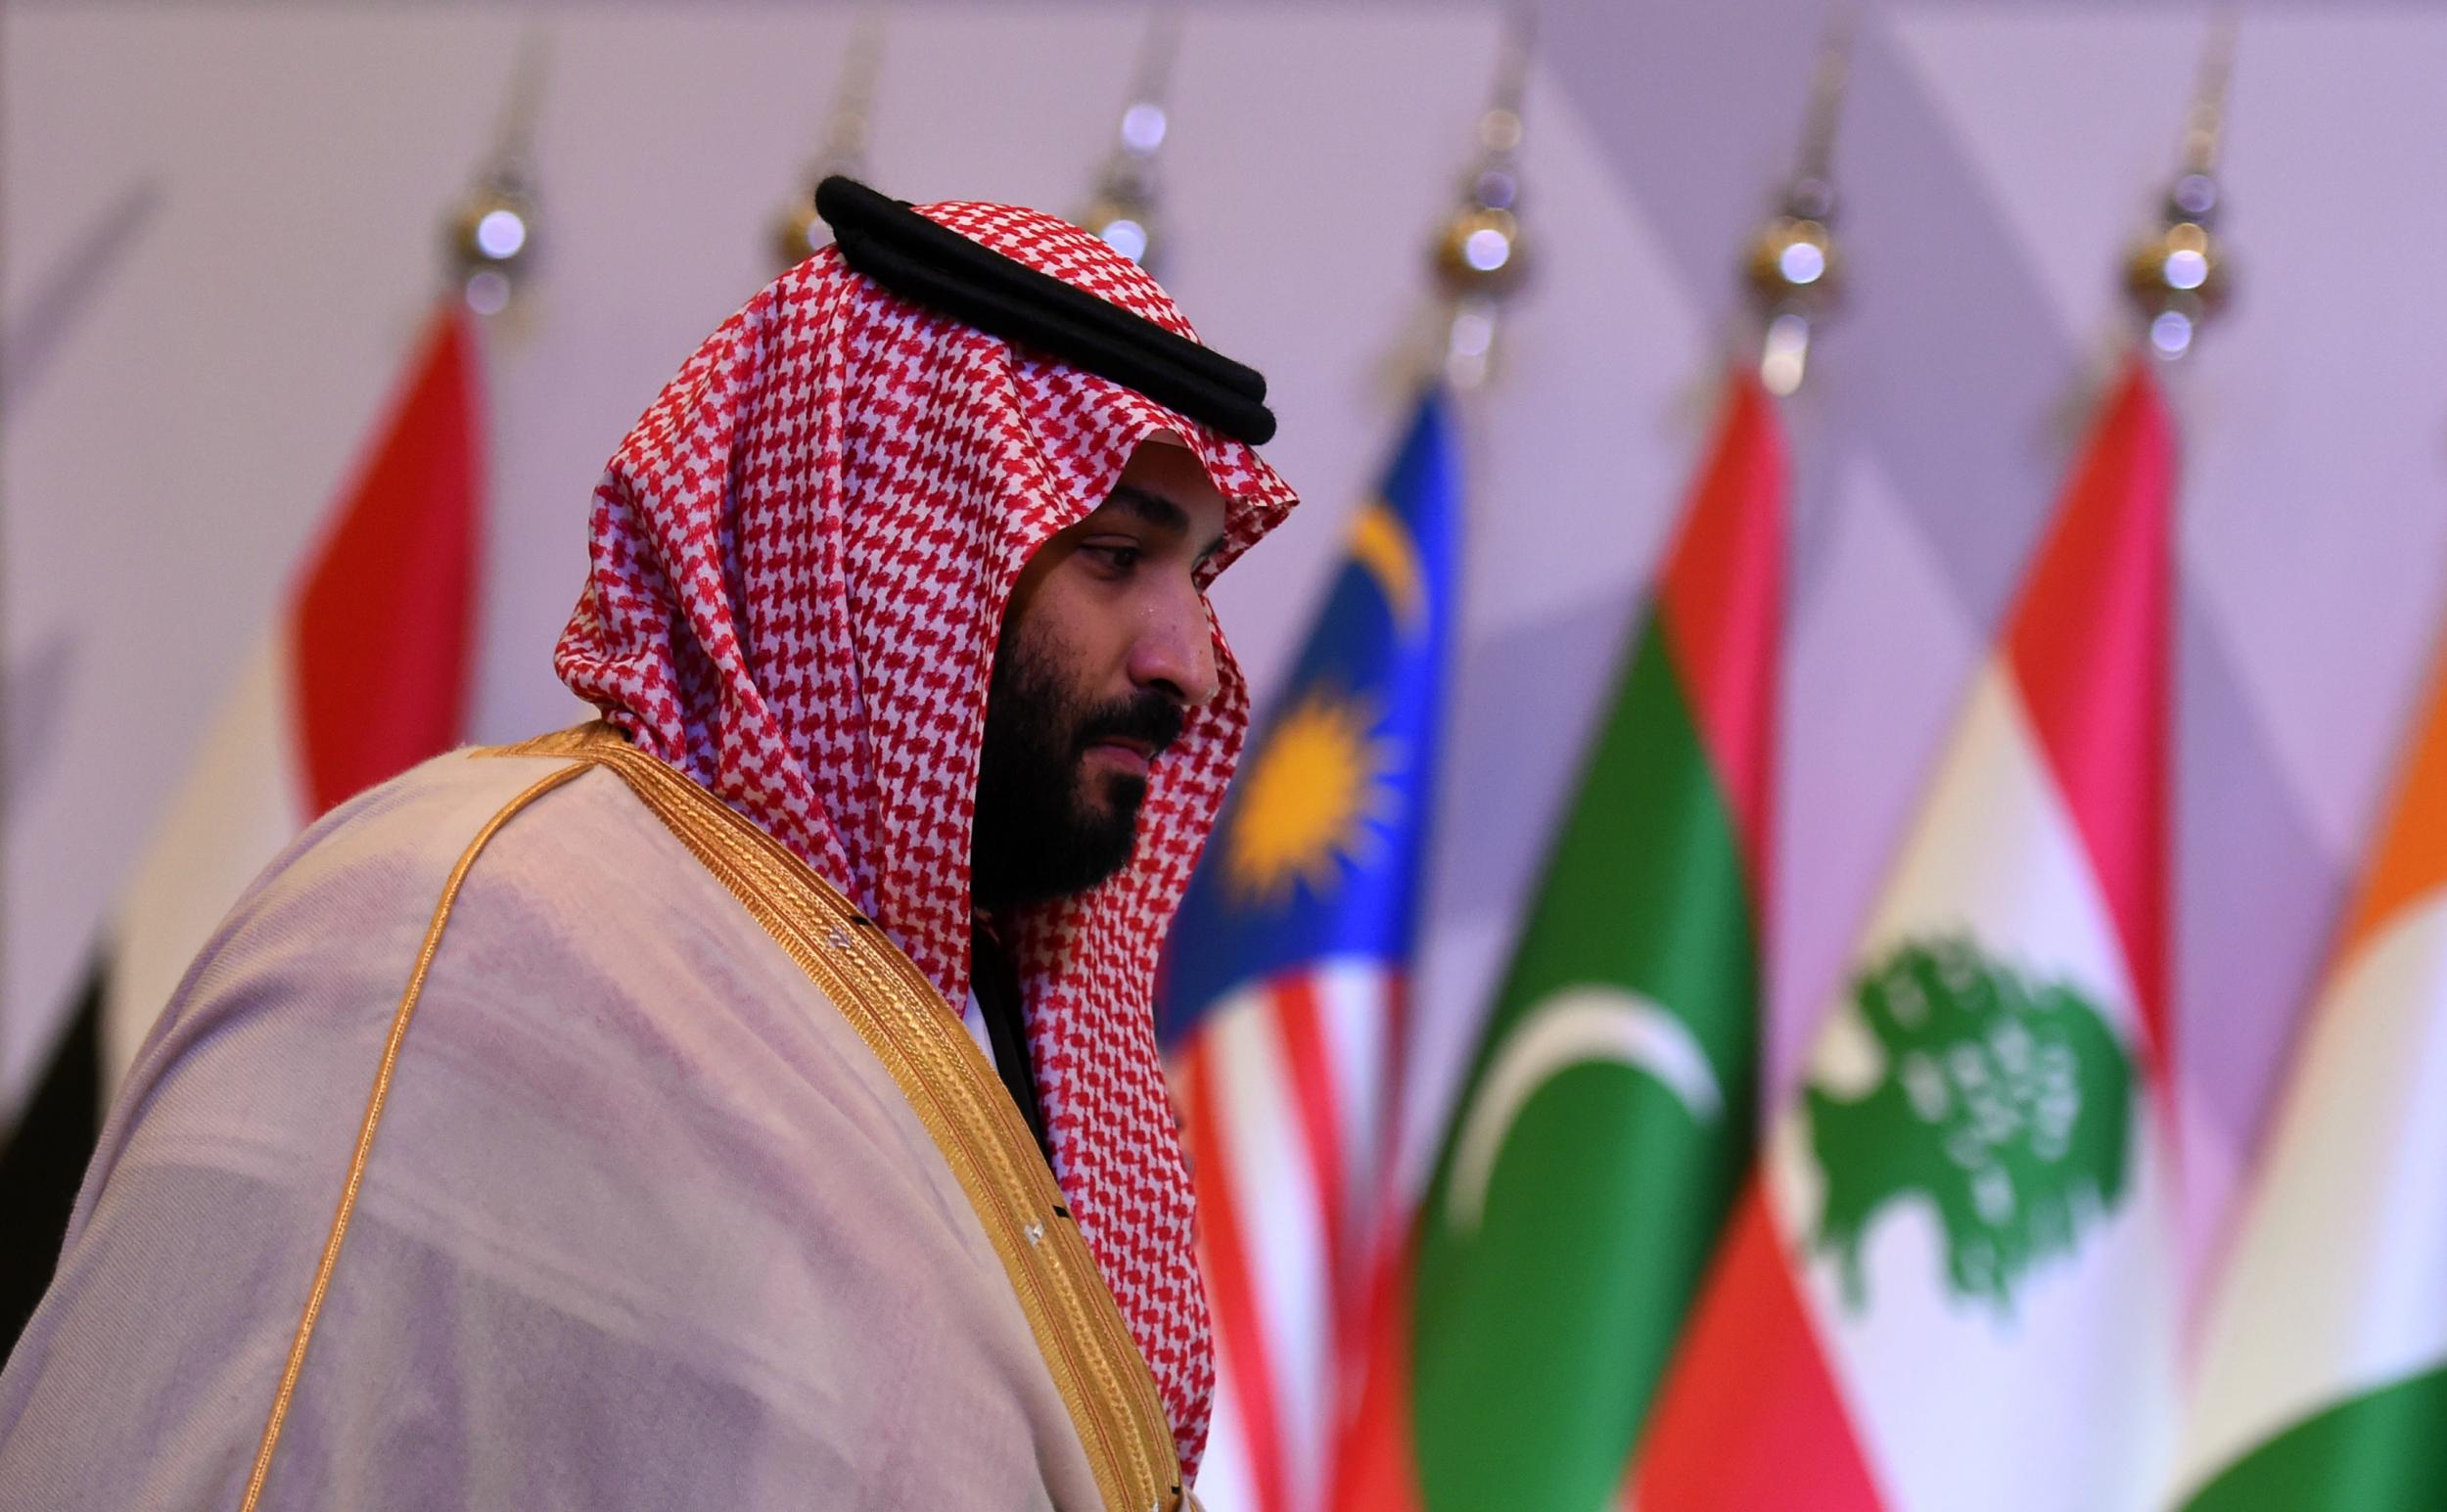 Since his father became king in 2015 Mohammed bin Salman has risen to control Saudi Arabia's economy, defence, internal security, social reforms and foreign policy strategy